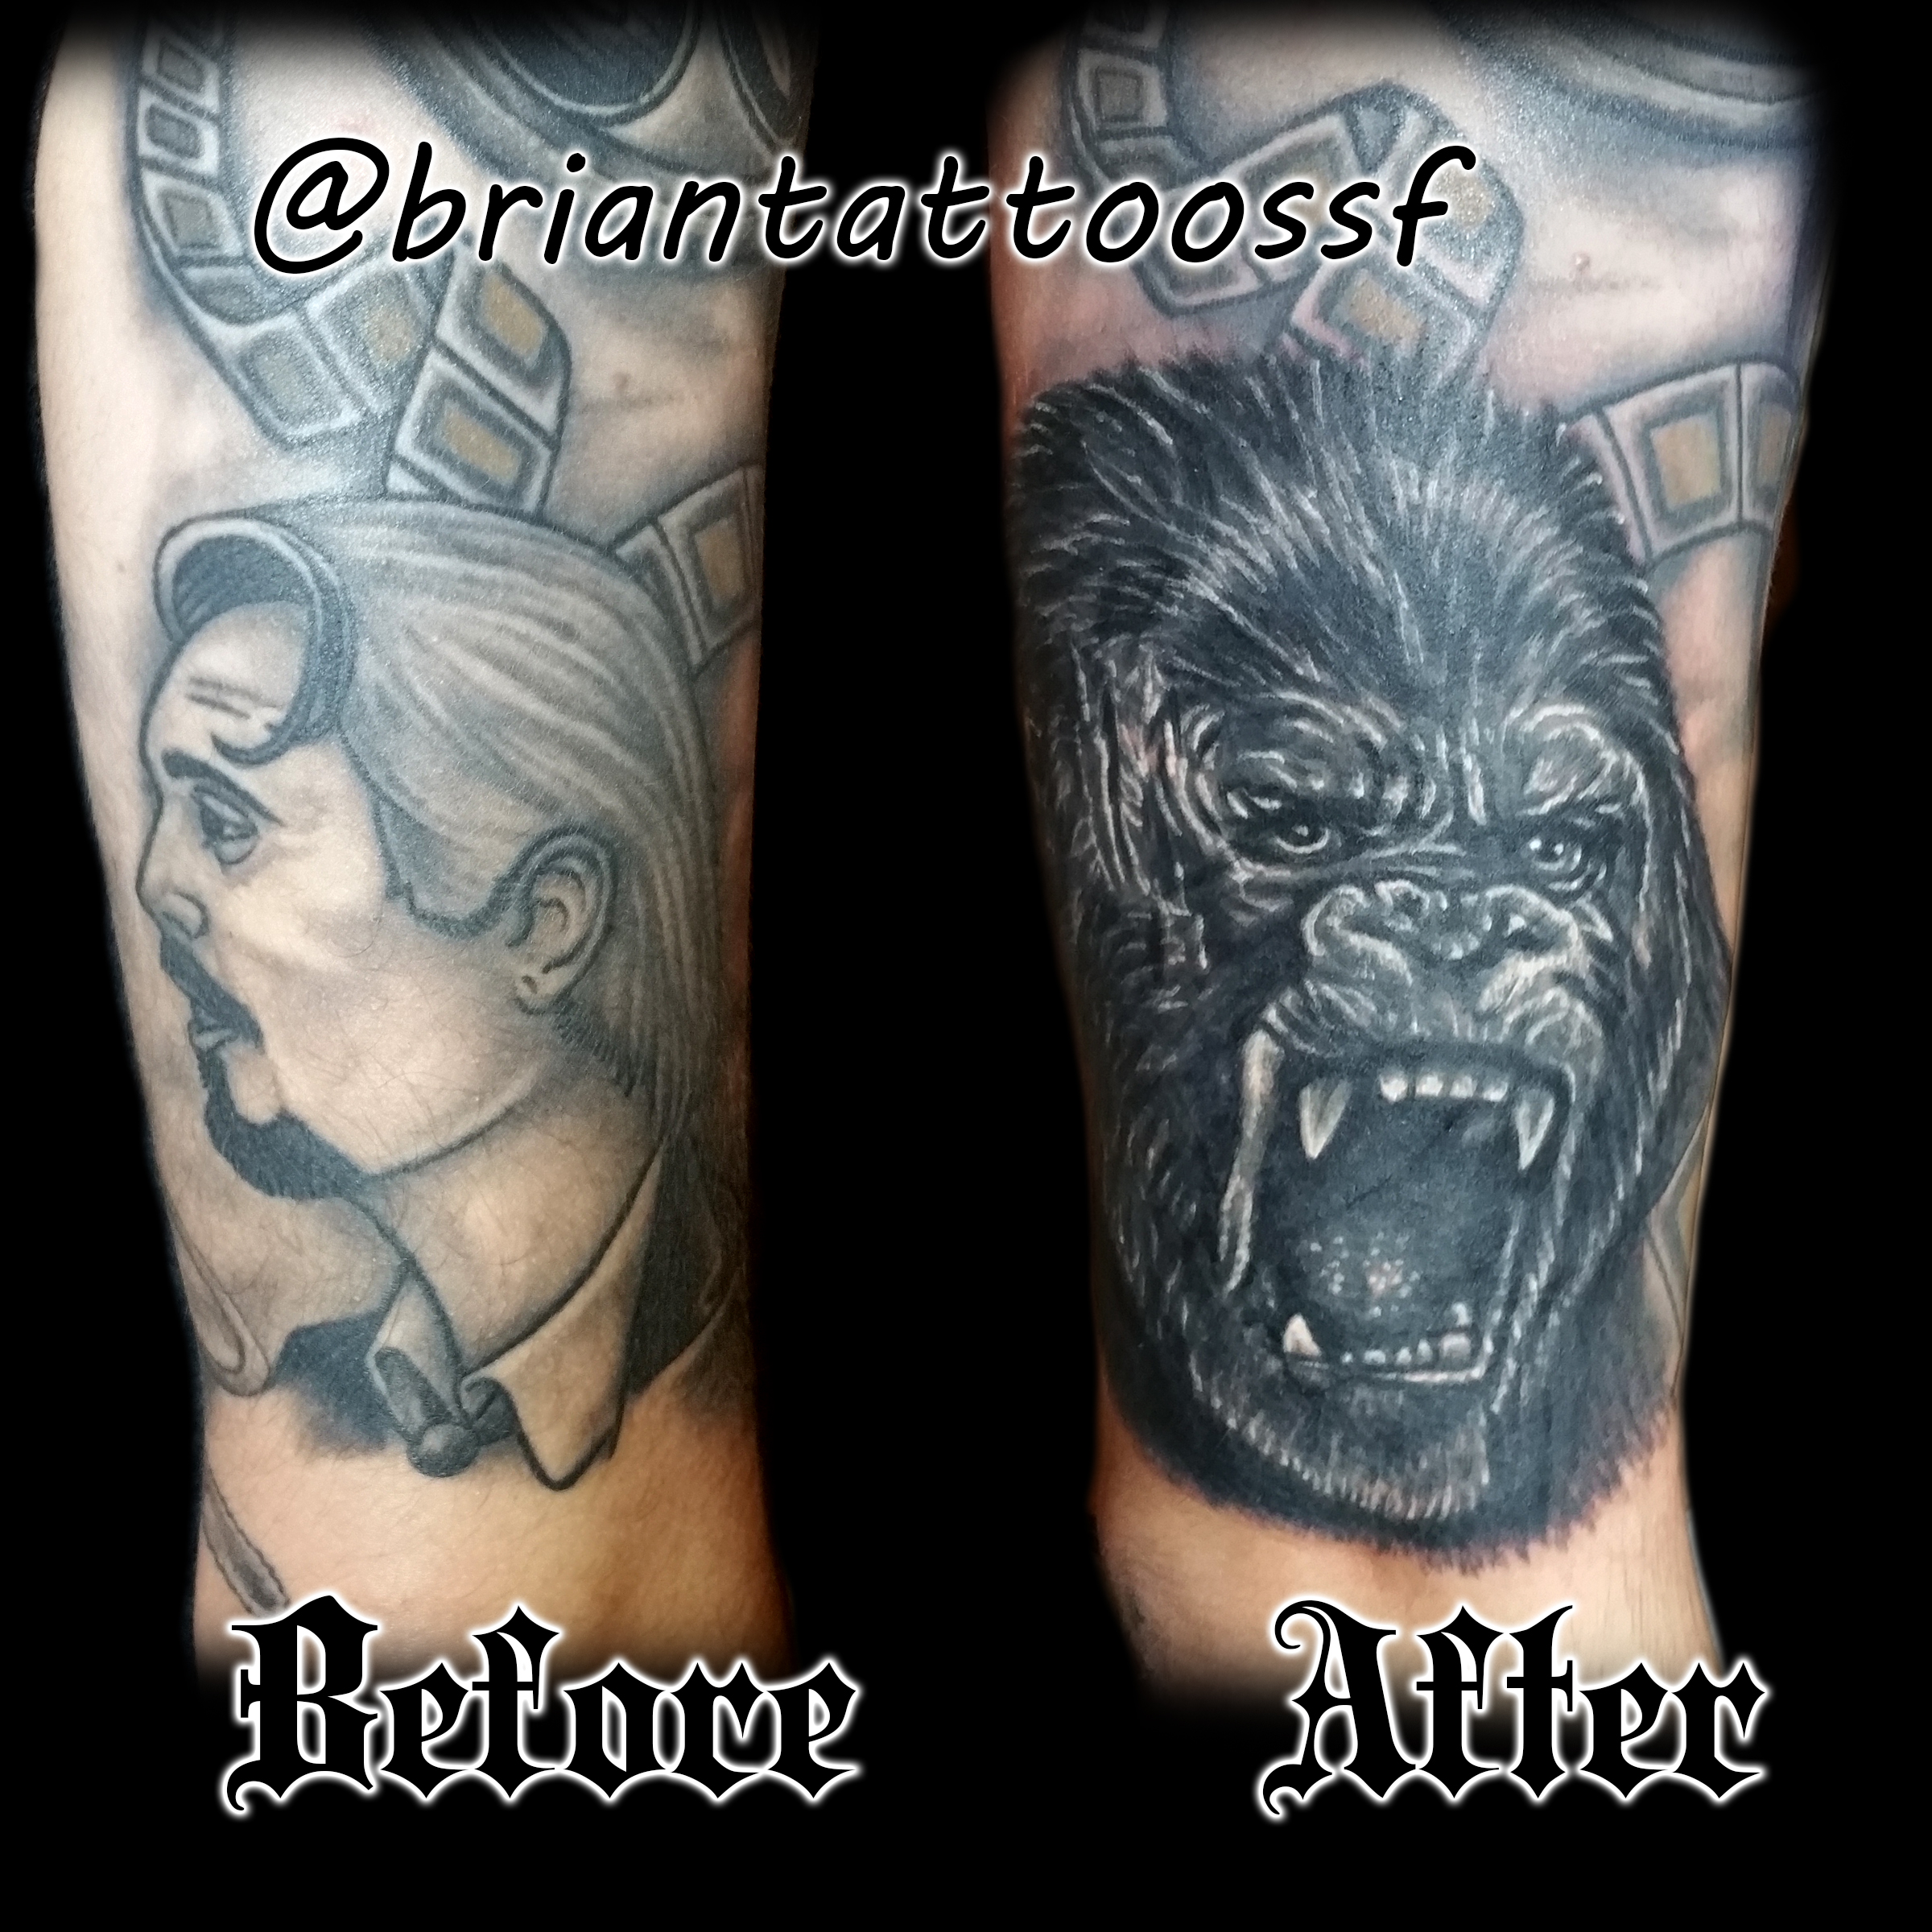 Cover Up Tattoos: Advice Before Getting One - AuthorityTattoo